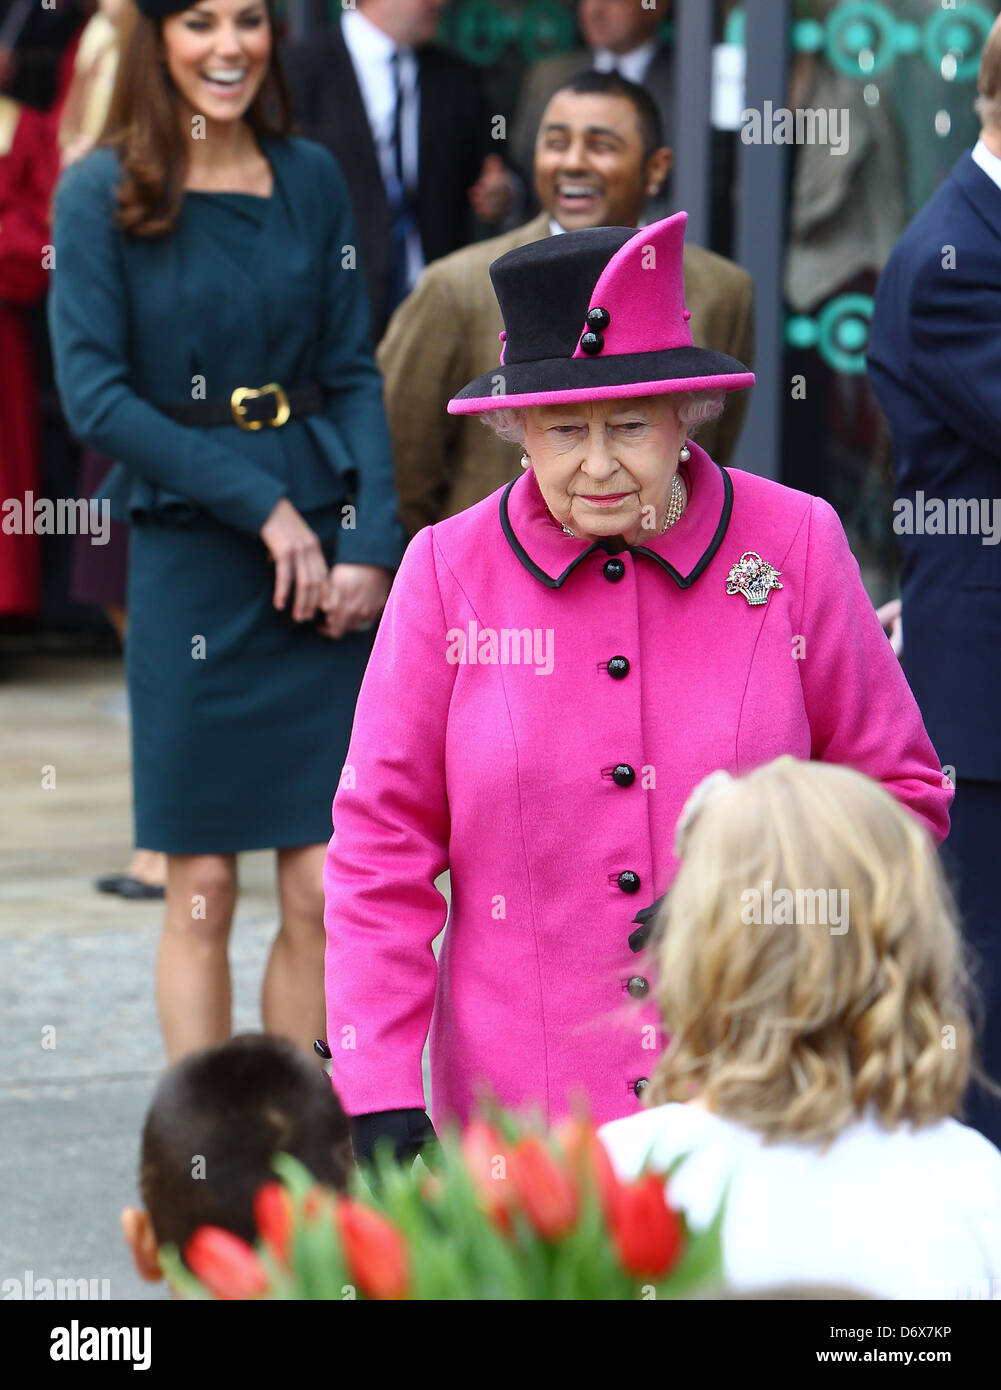 Queen Elizabeth II at De Montfort University during a visit to Leicester for her Diamond Jubilee Leicester, England - 08.03.12 Stock Photo